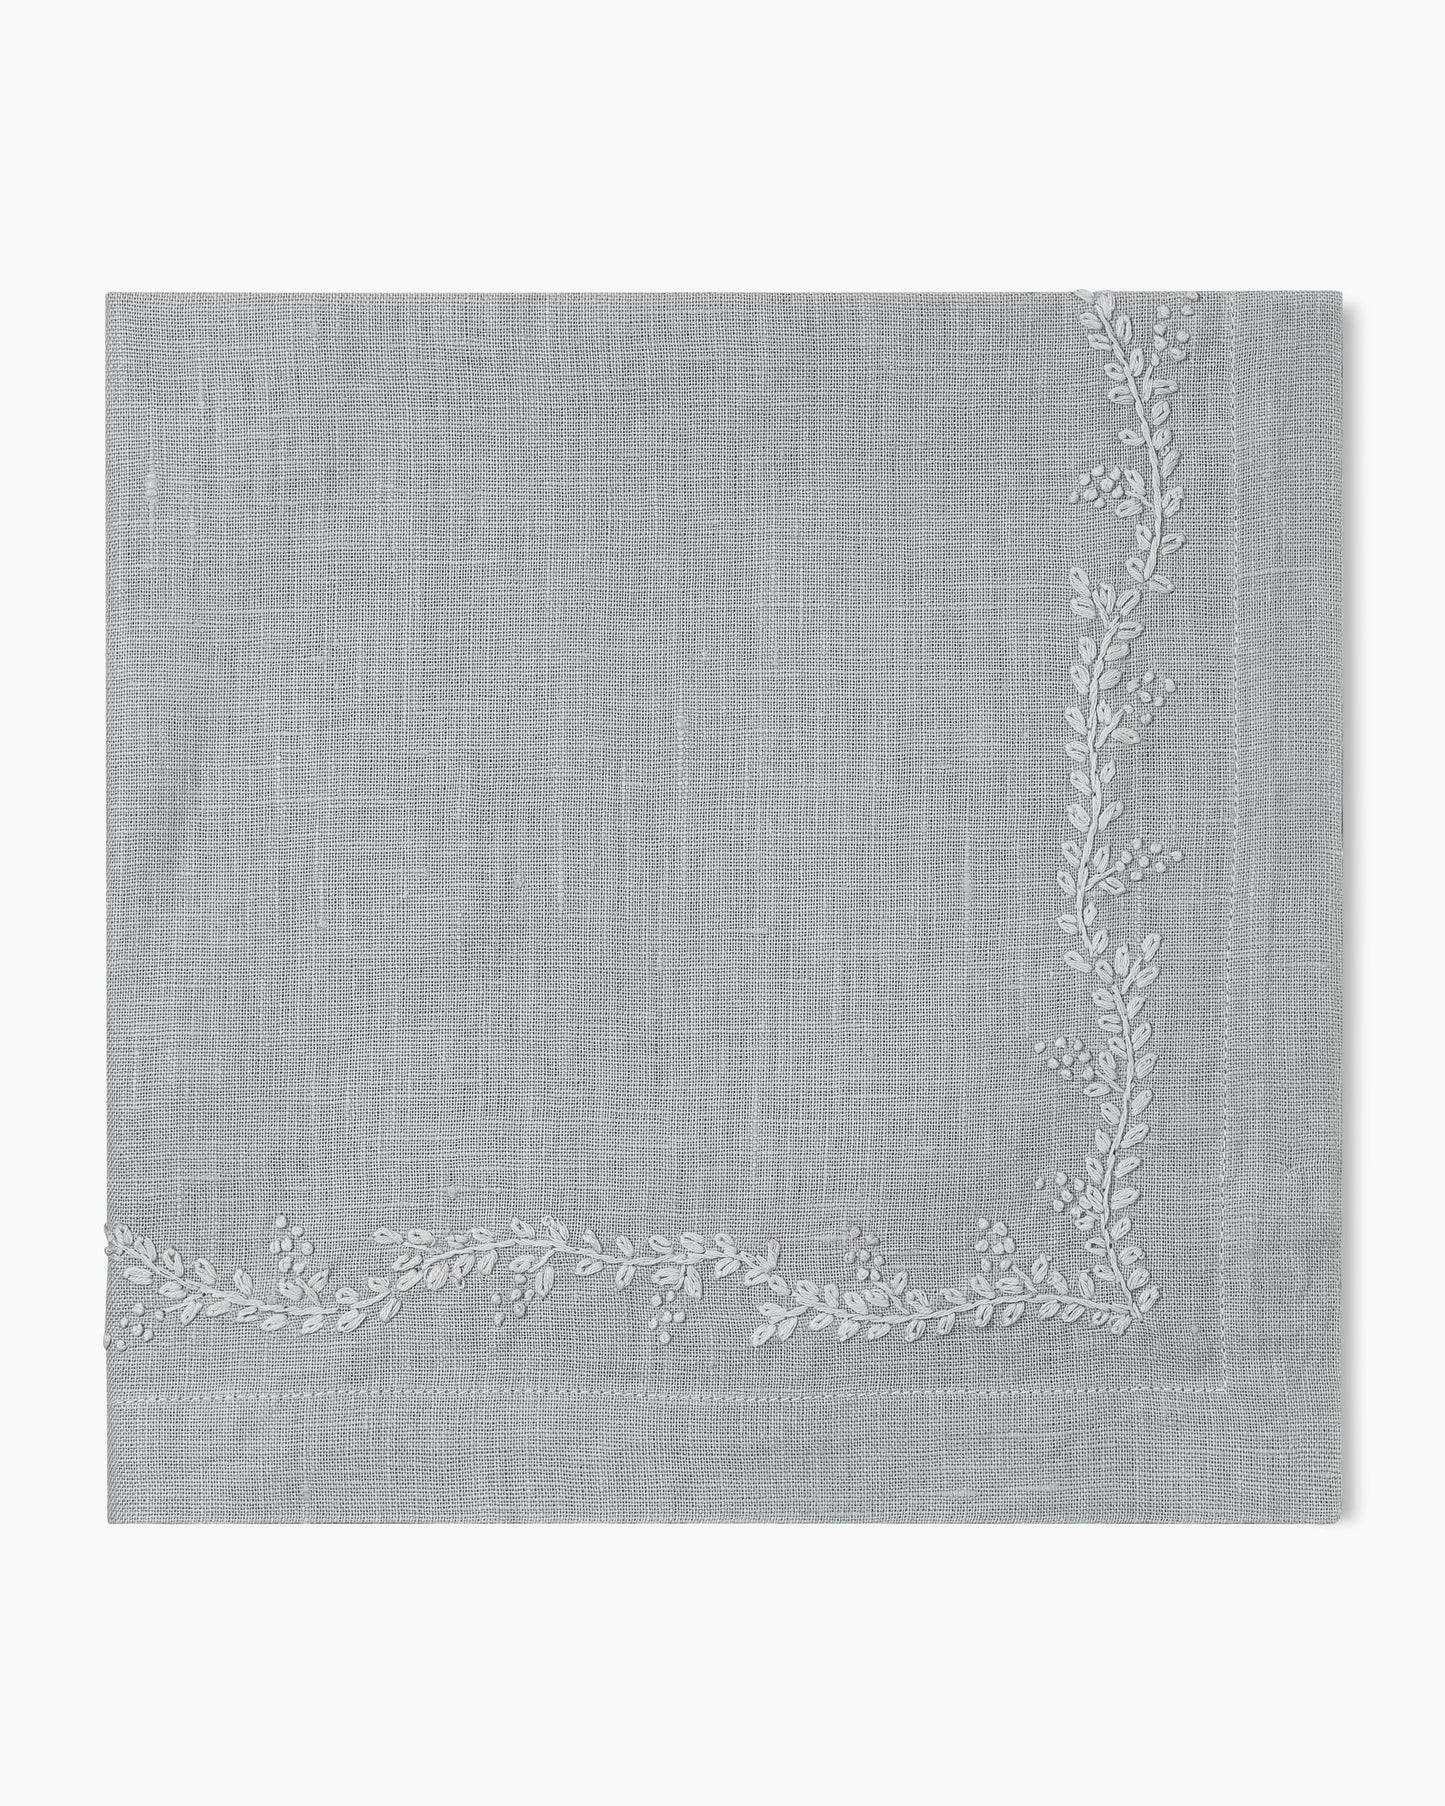 A Prism Vine Linen Dinner Napkin - 13 Colors by Henry Handwork with white embroidery, perfect for table linens.